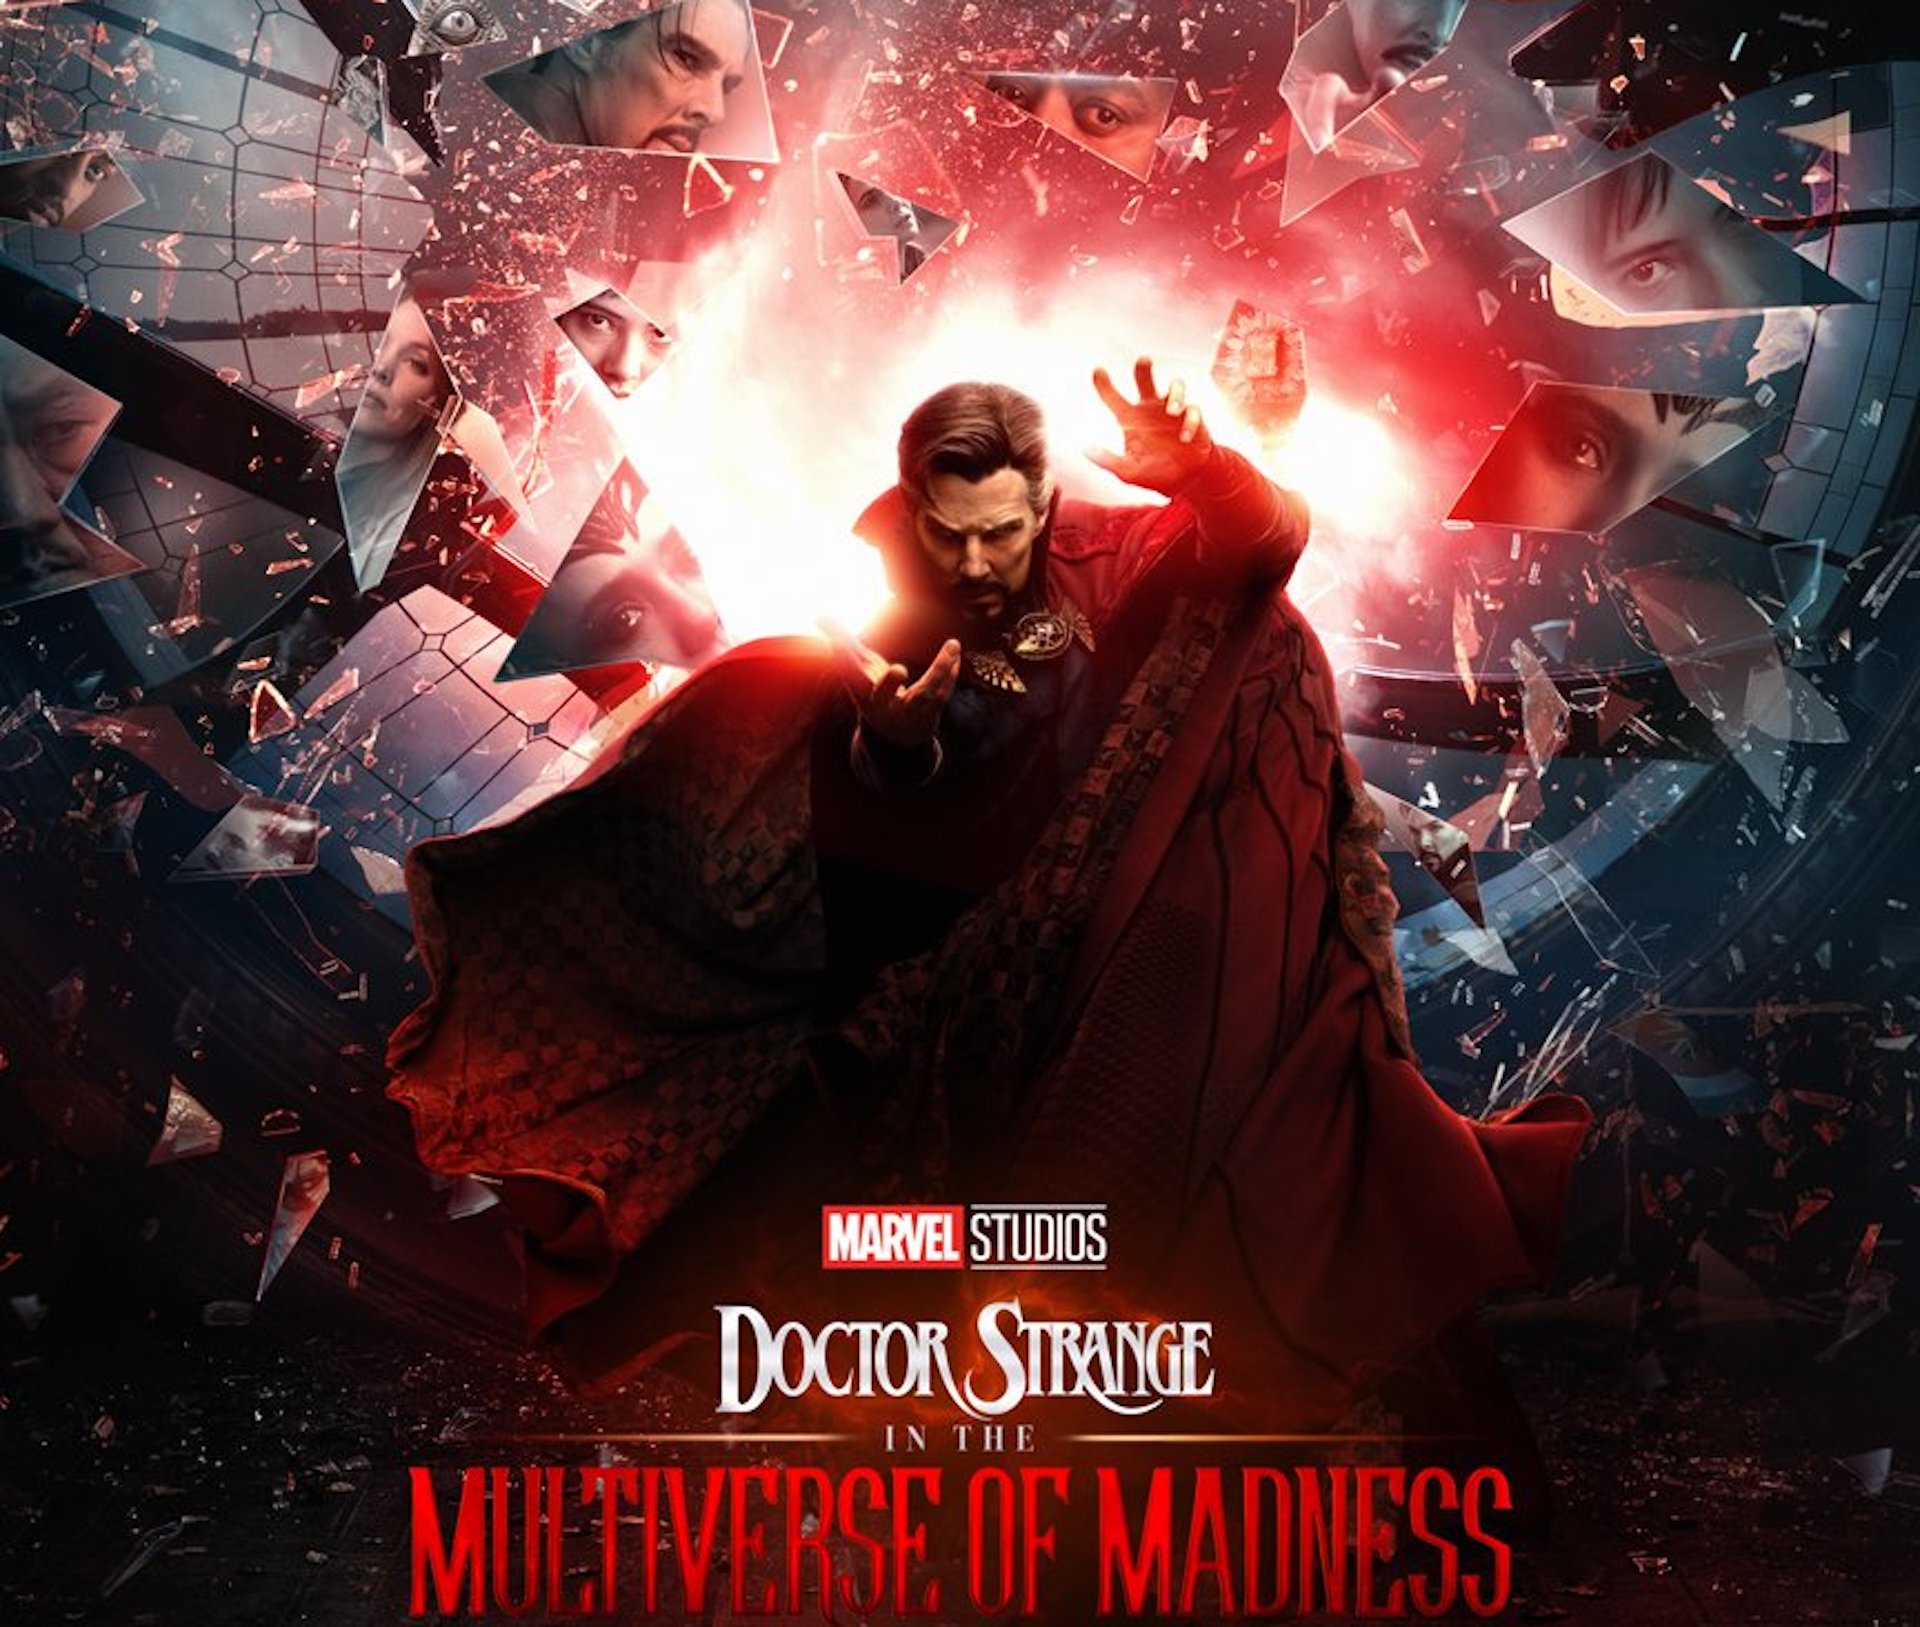 Who was that voice in the 'Doctor Strange in the Multiverse of Madness' trailer?